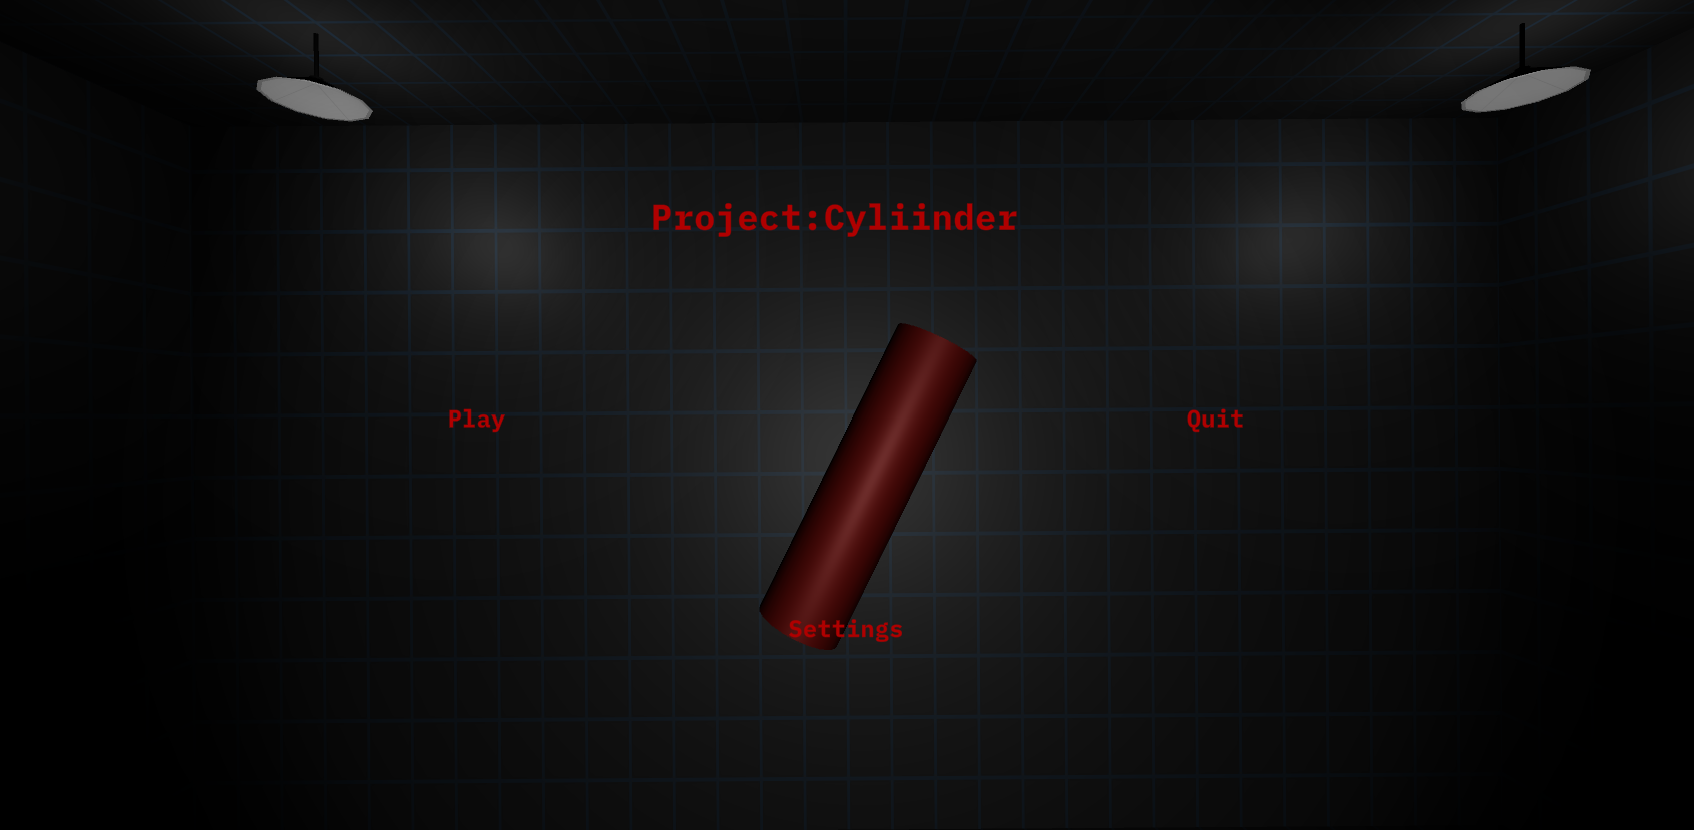 Project:Cyllinder